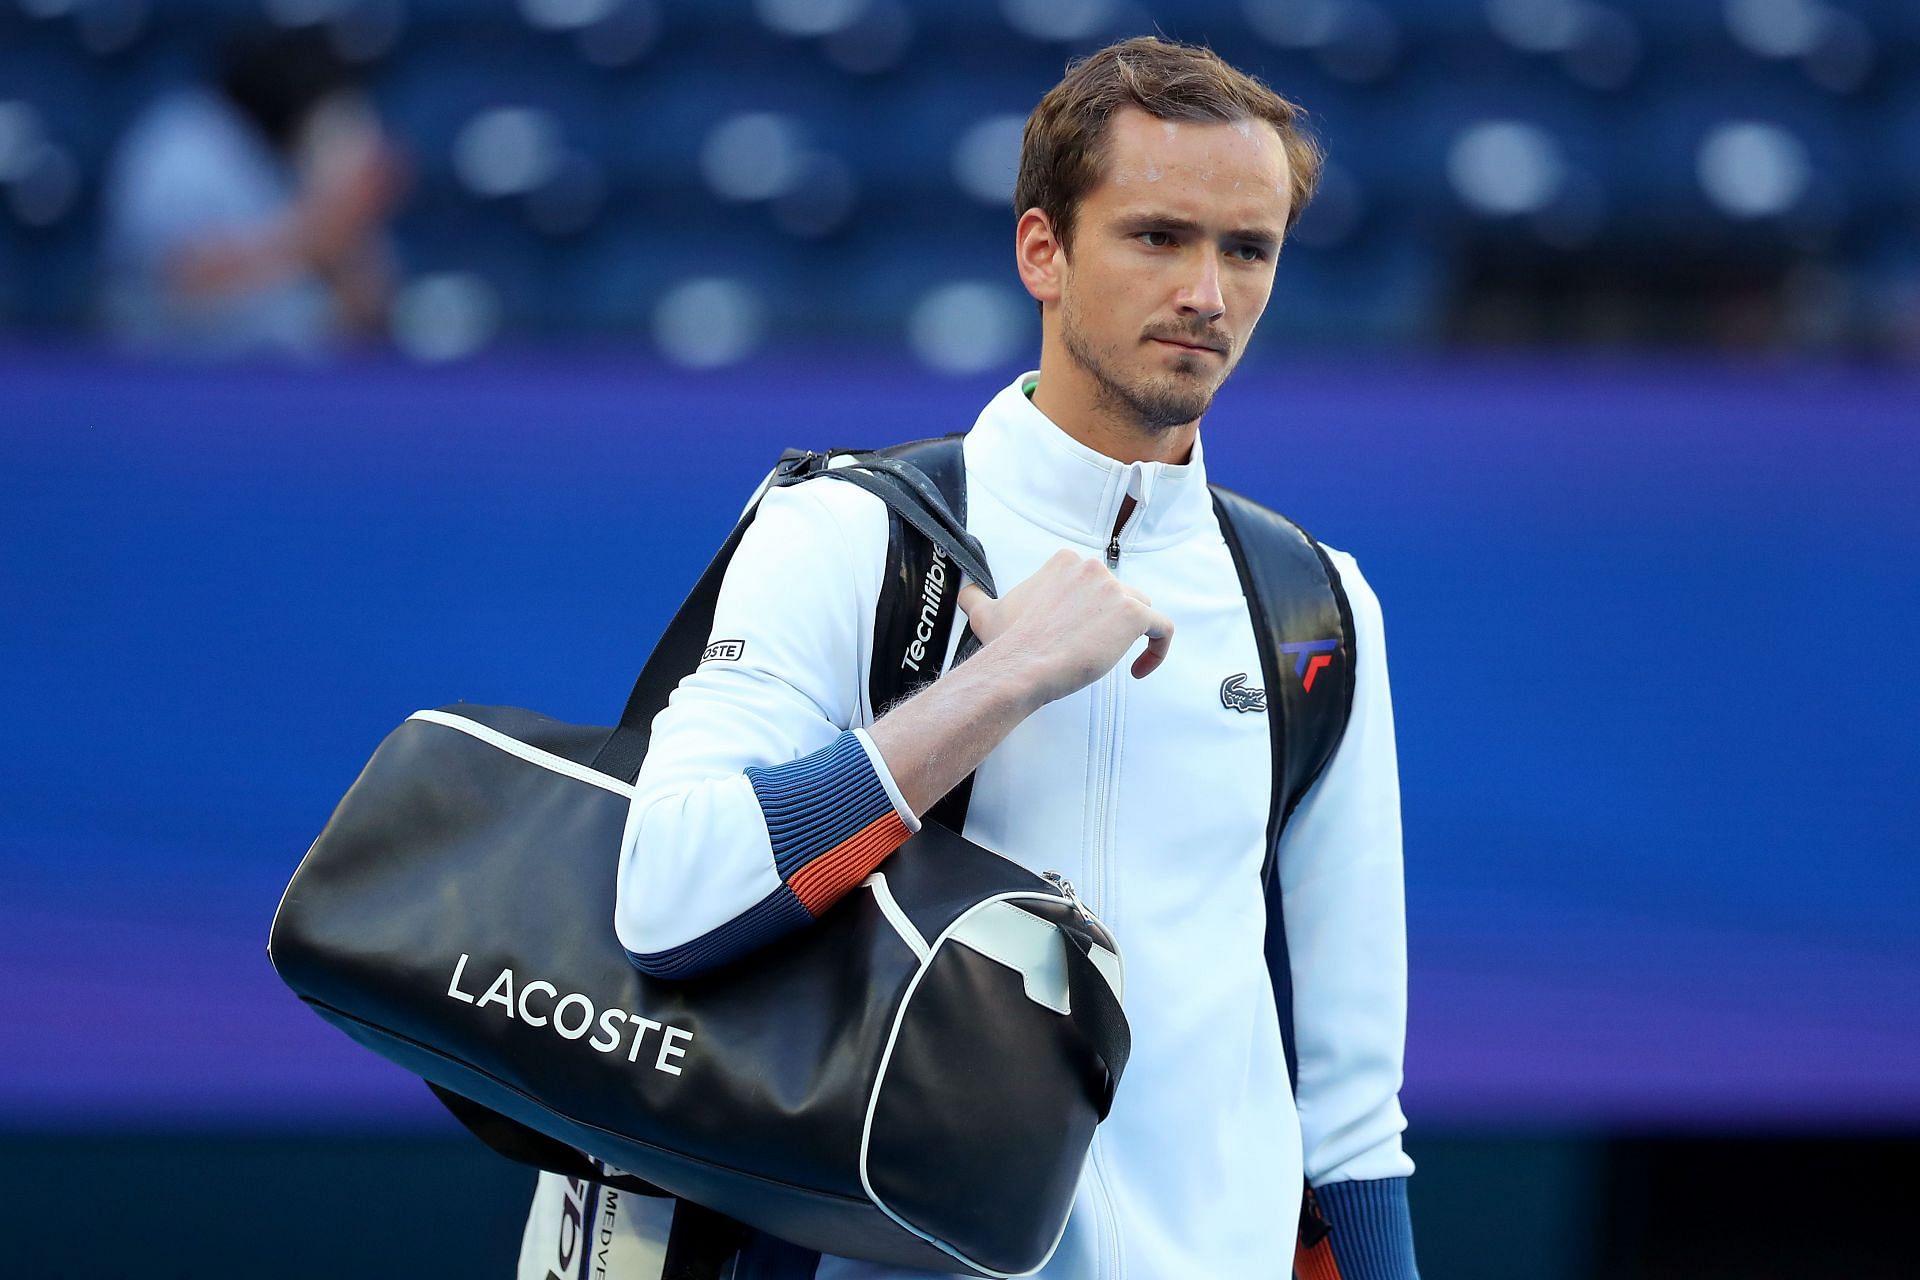 Like most players, Daniil Medvedev was not a fan of the chant at the Australian Open